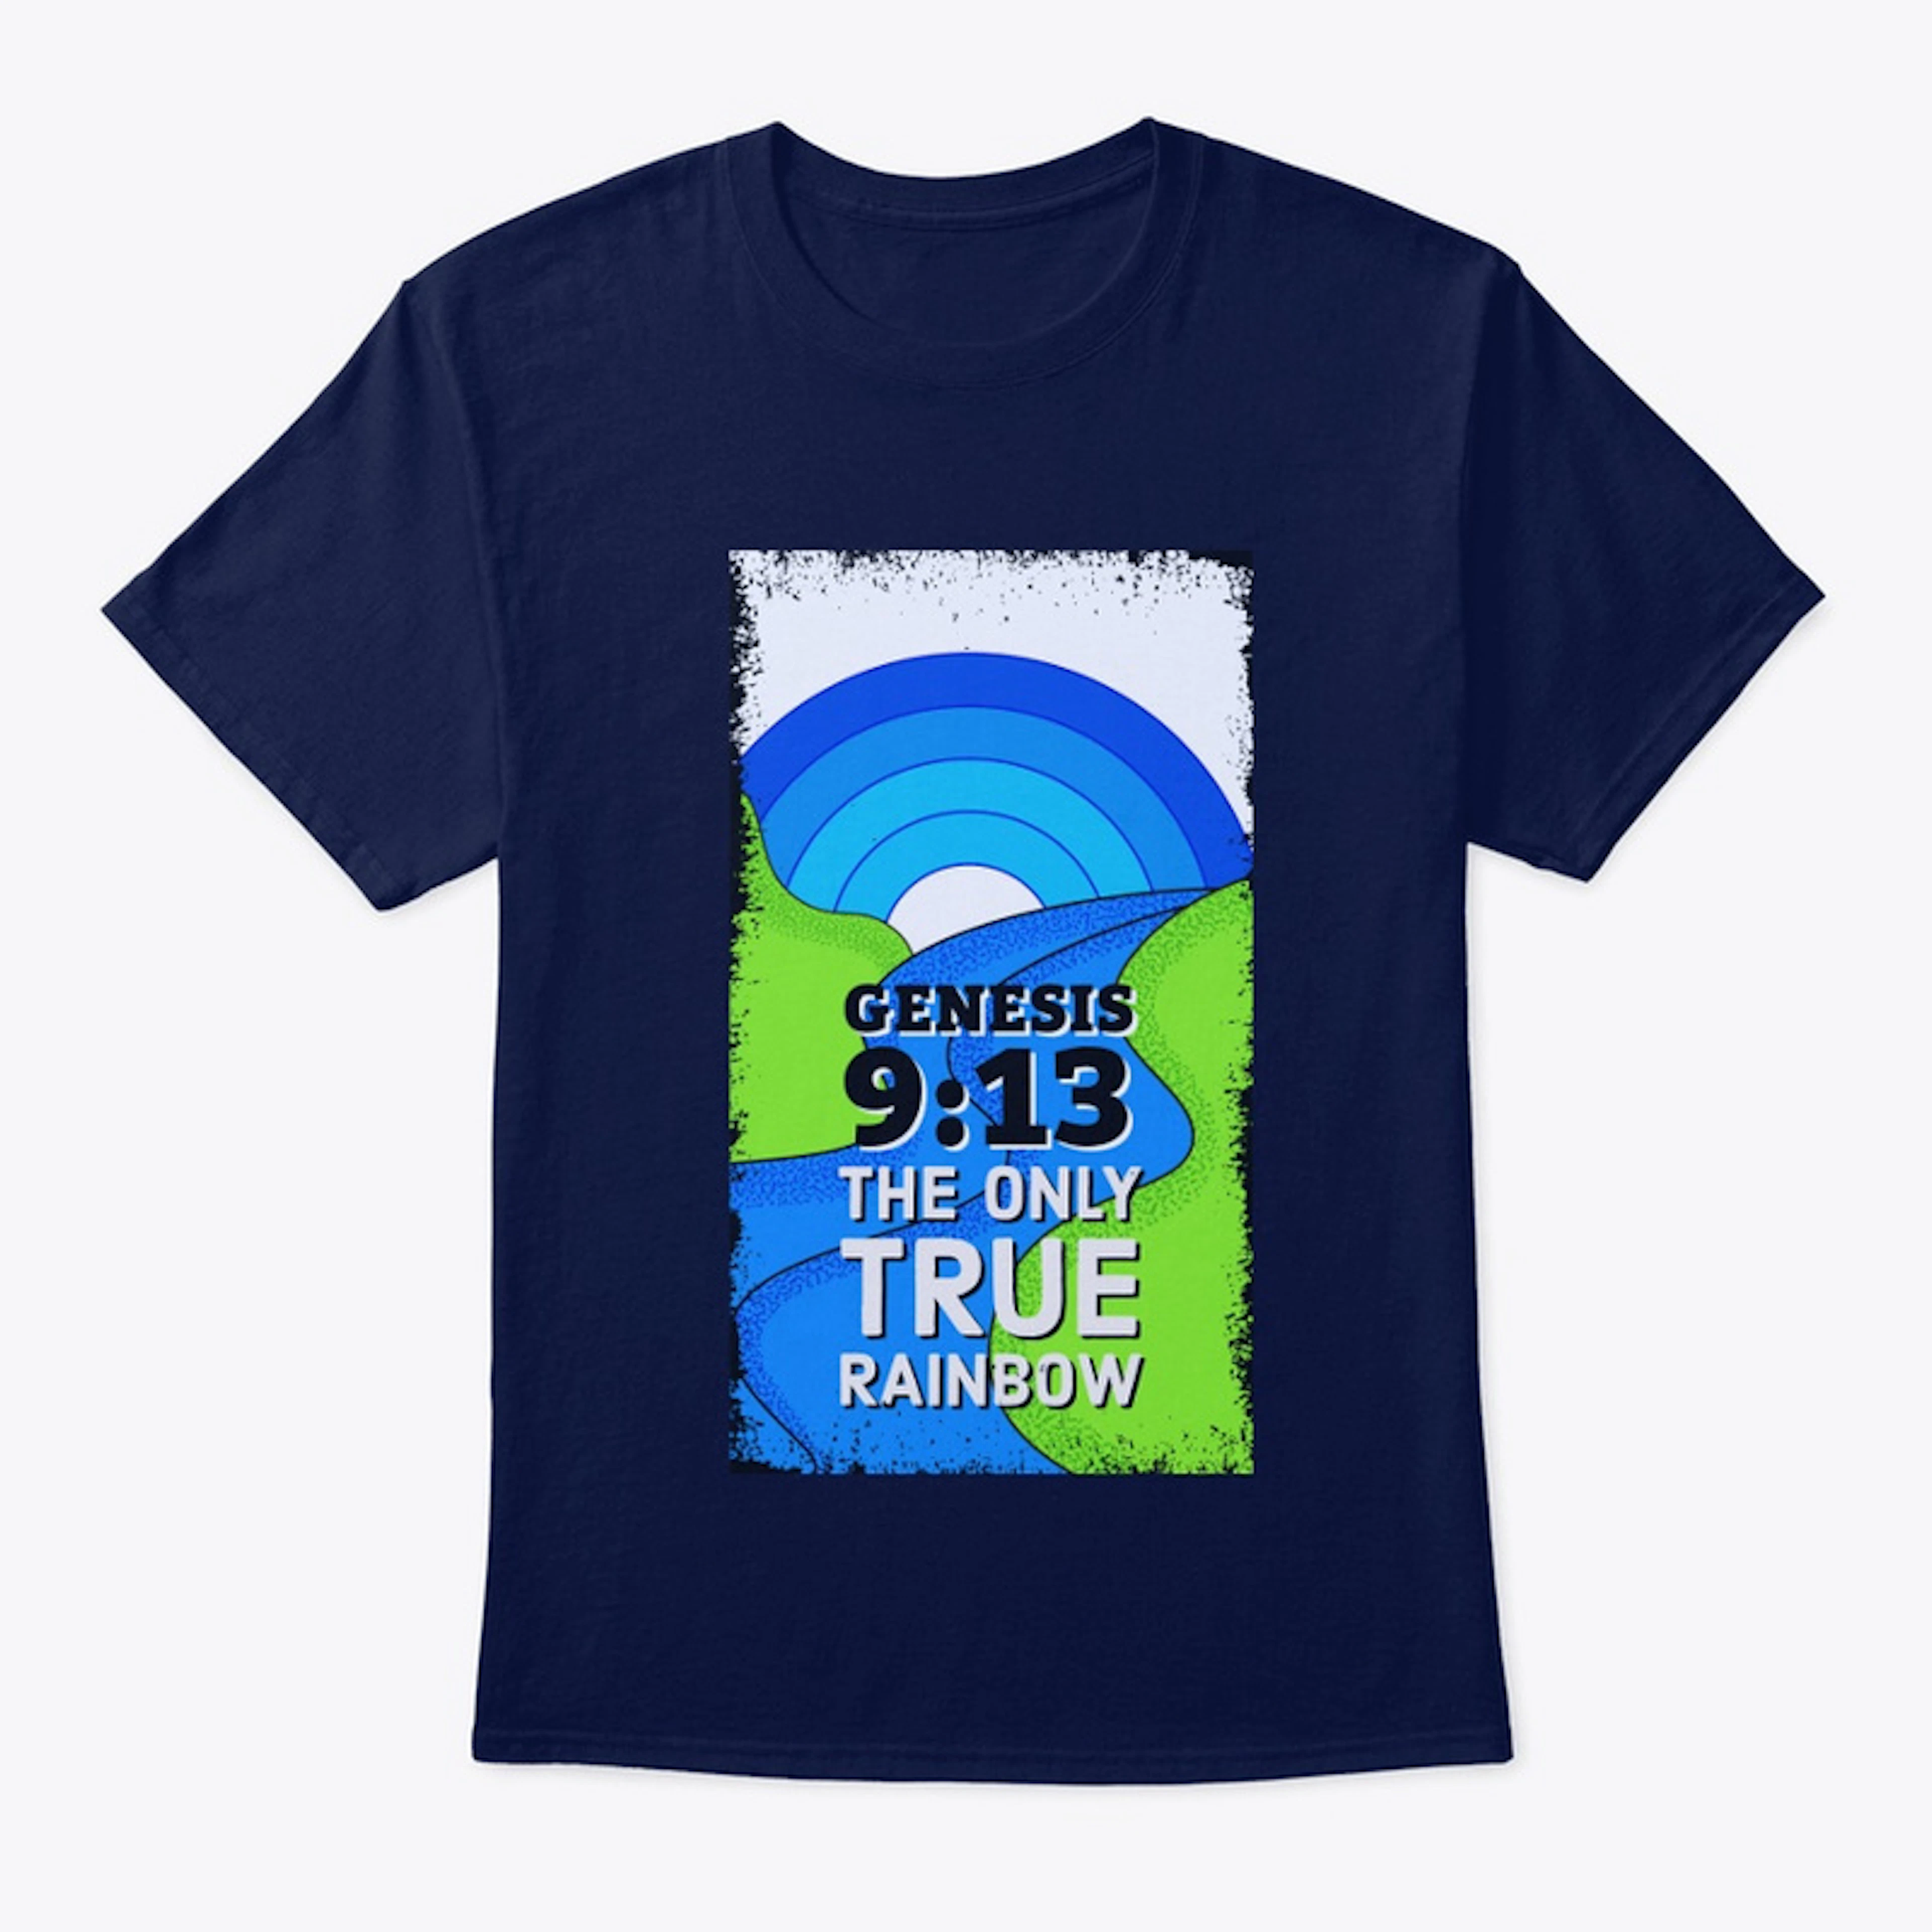 The Only True Rainbow T-shirt 